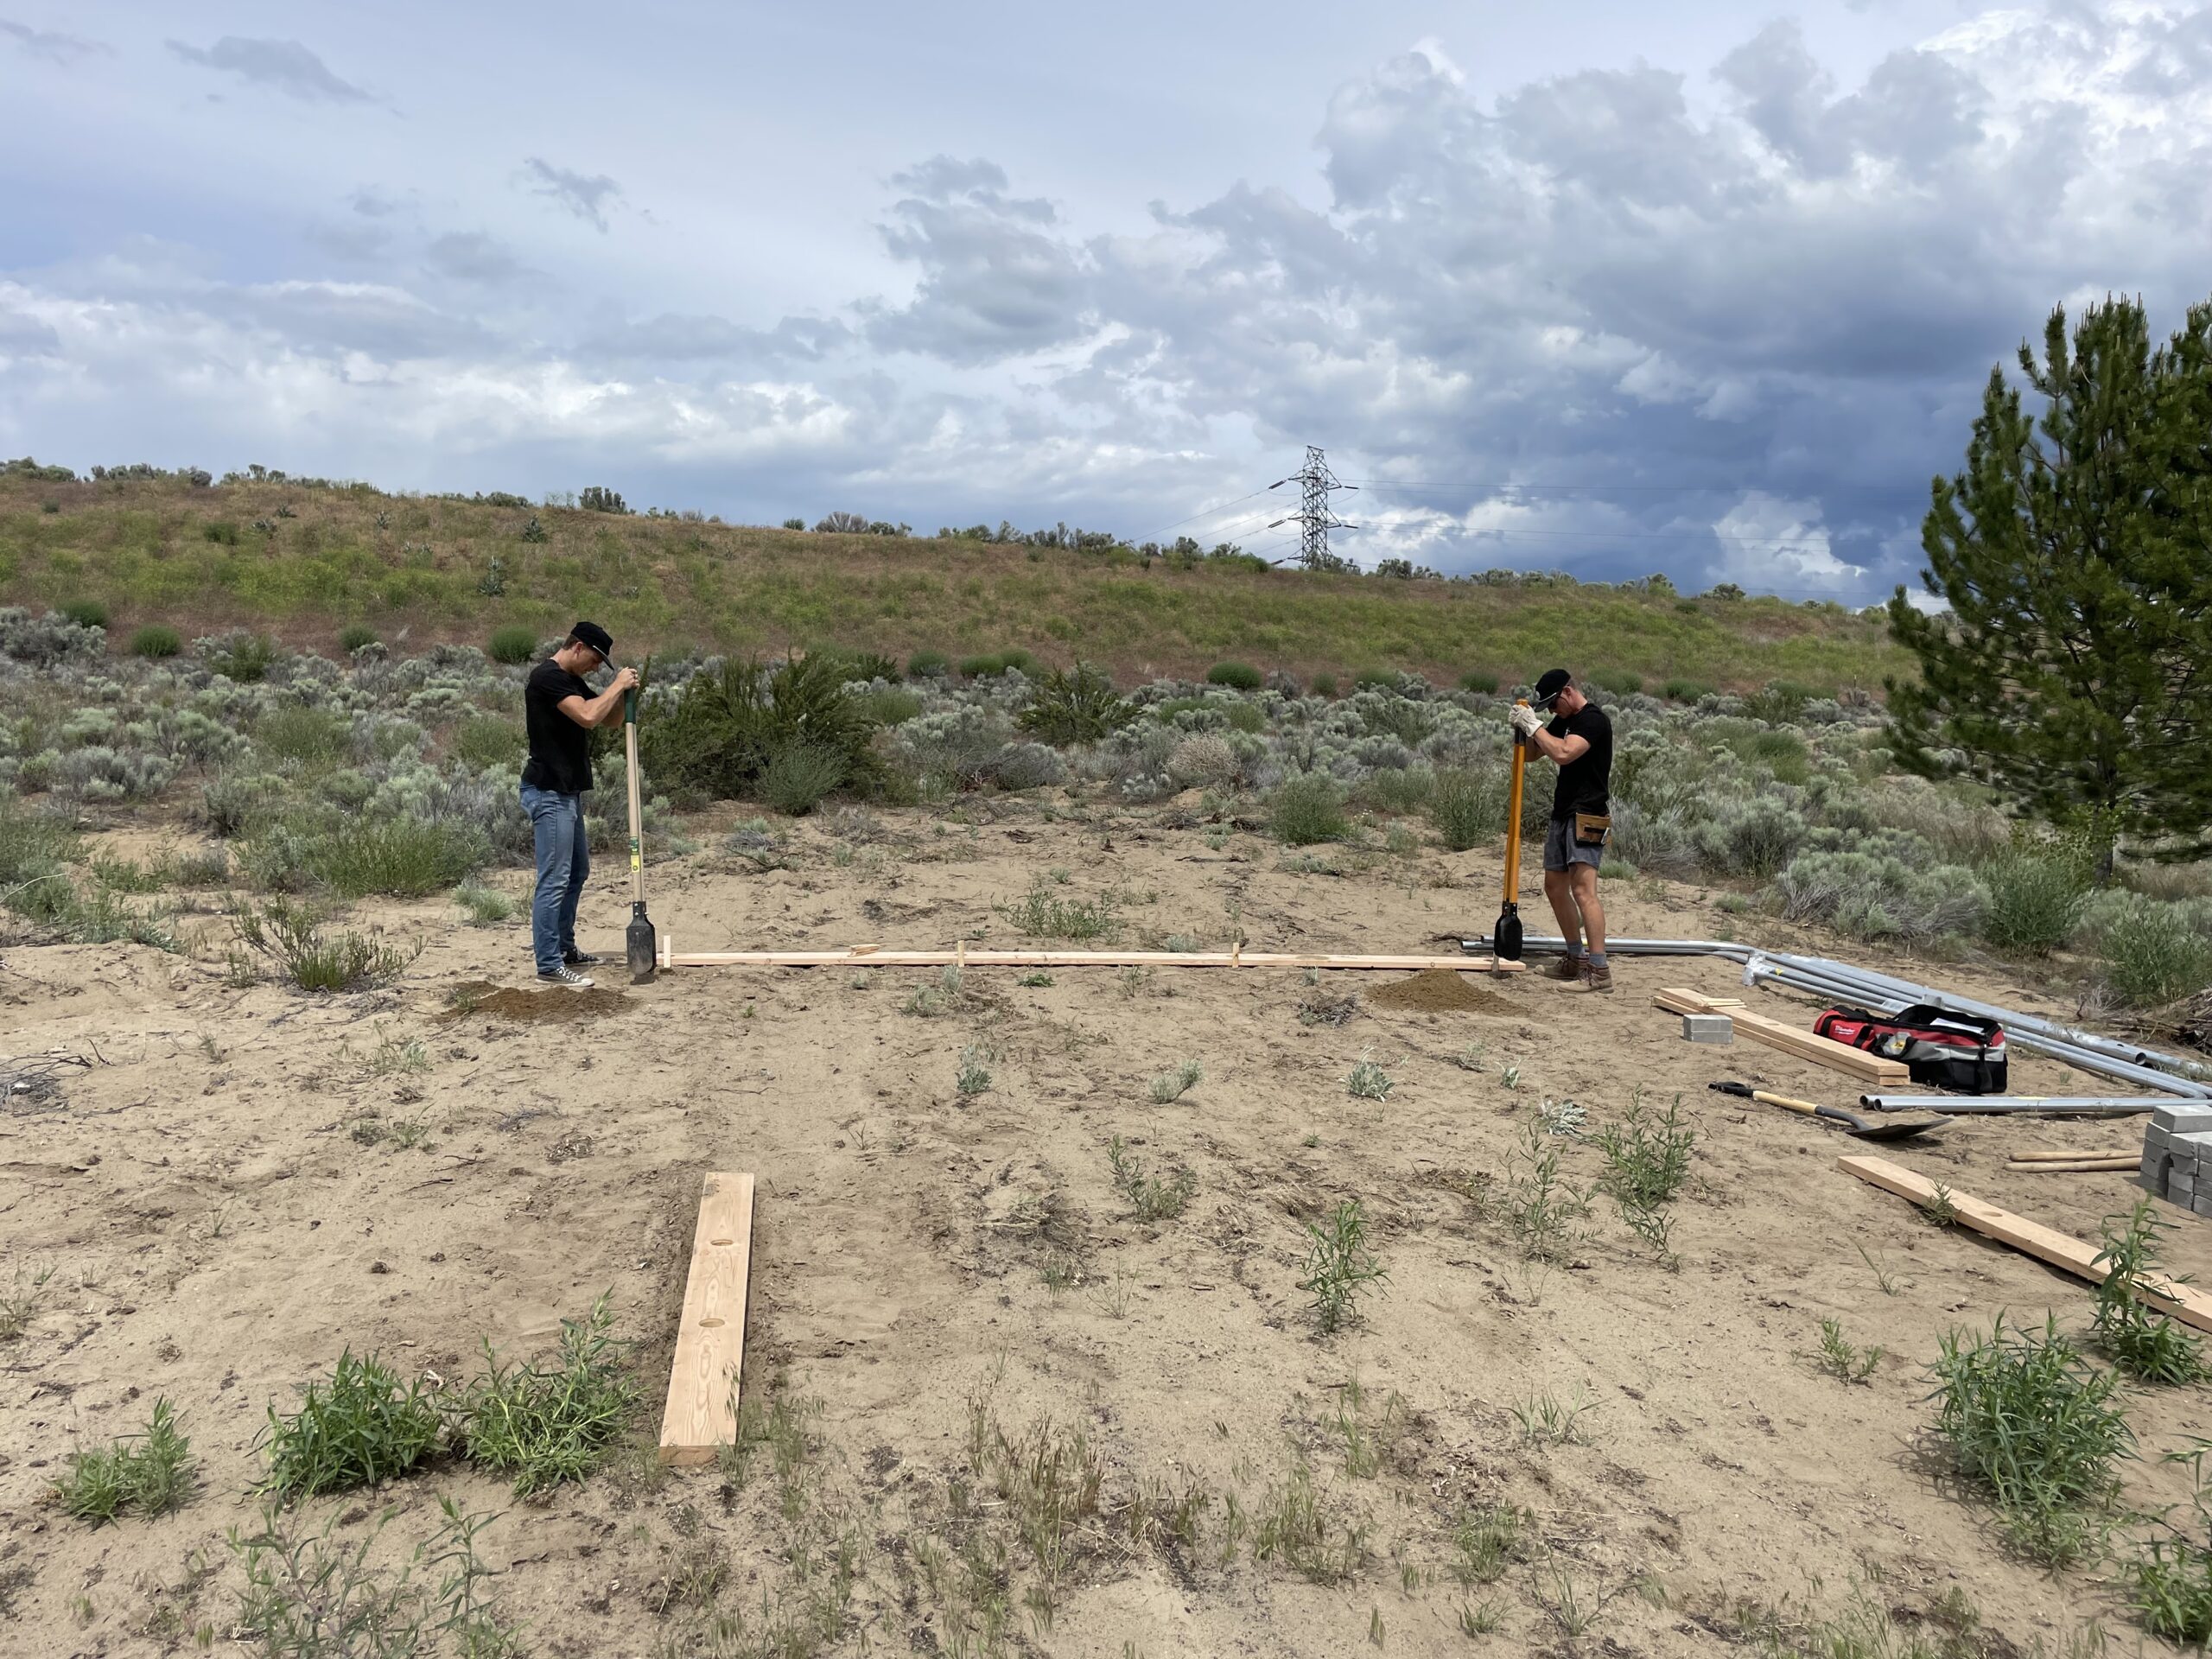 Payton Dwight, left, and Drew Harvey installing a fitness station at a sober-living facility in Omak, Washington. PHOTO COURTESY DAWGPATCH BANDITS